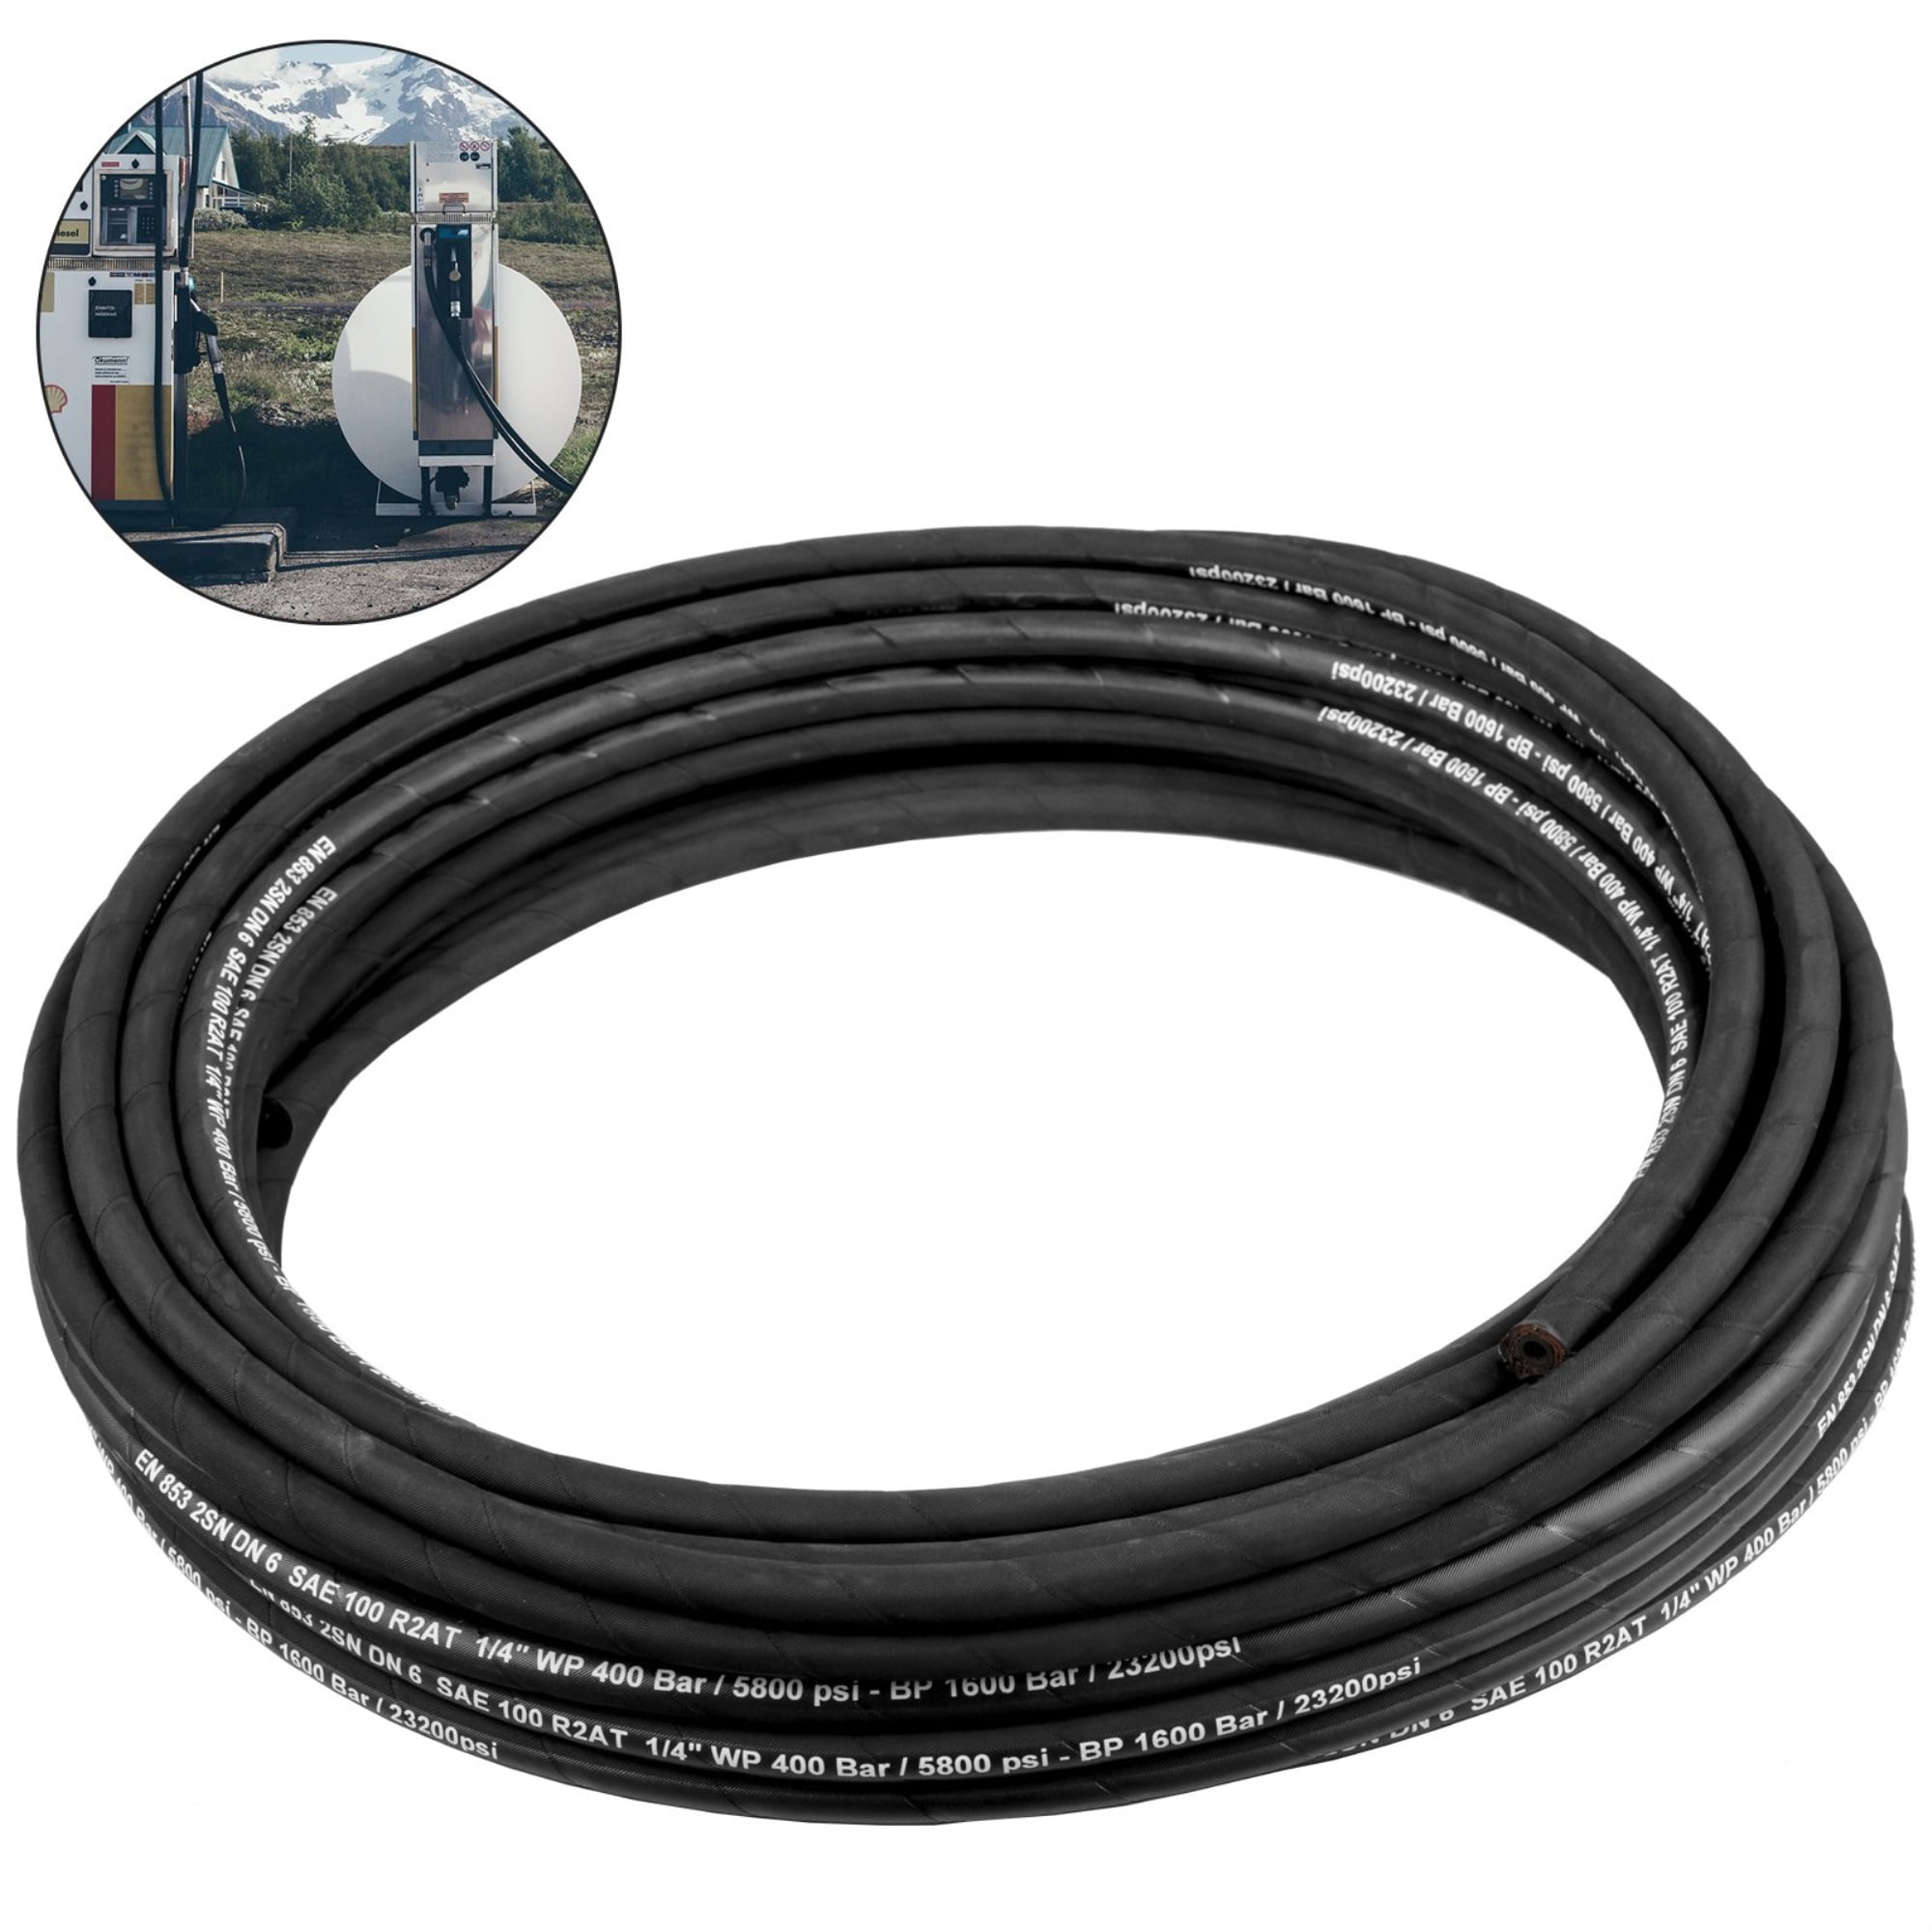 HYDRAULIC HOSE 40FT R2T06 3/8 SAE W.P PSI 4800 2 WIRE FREE SHIPPING 